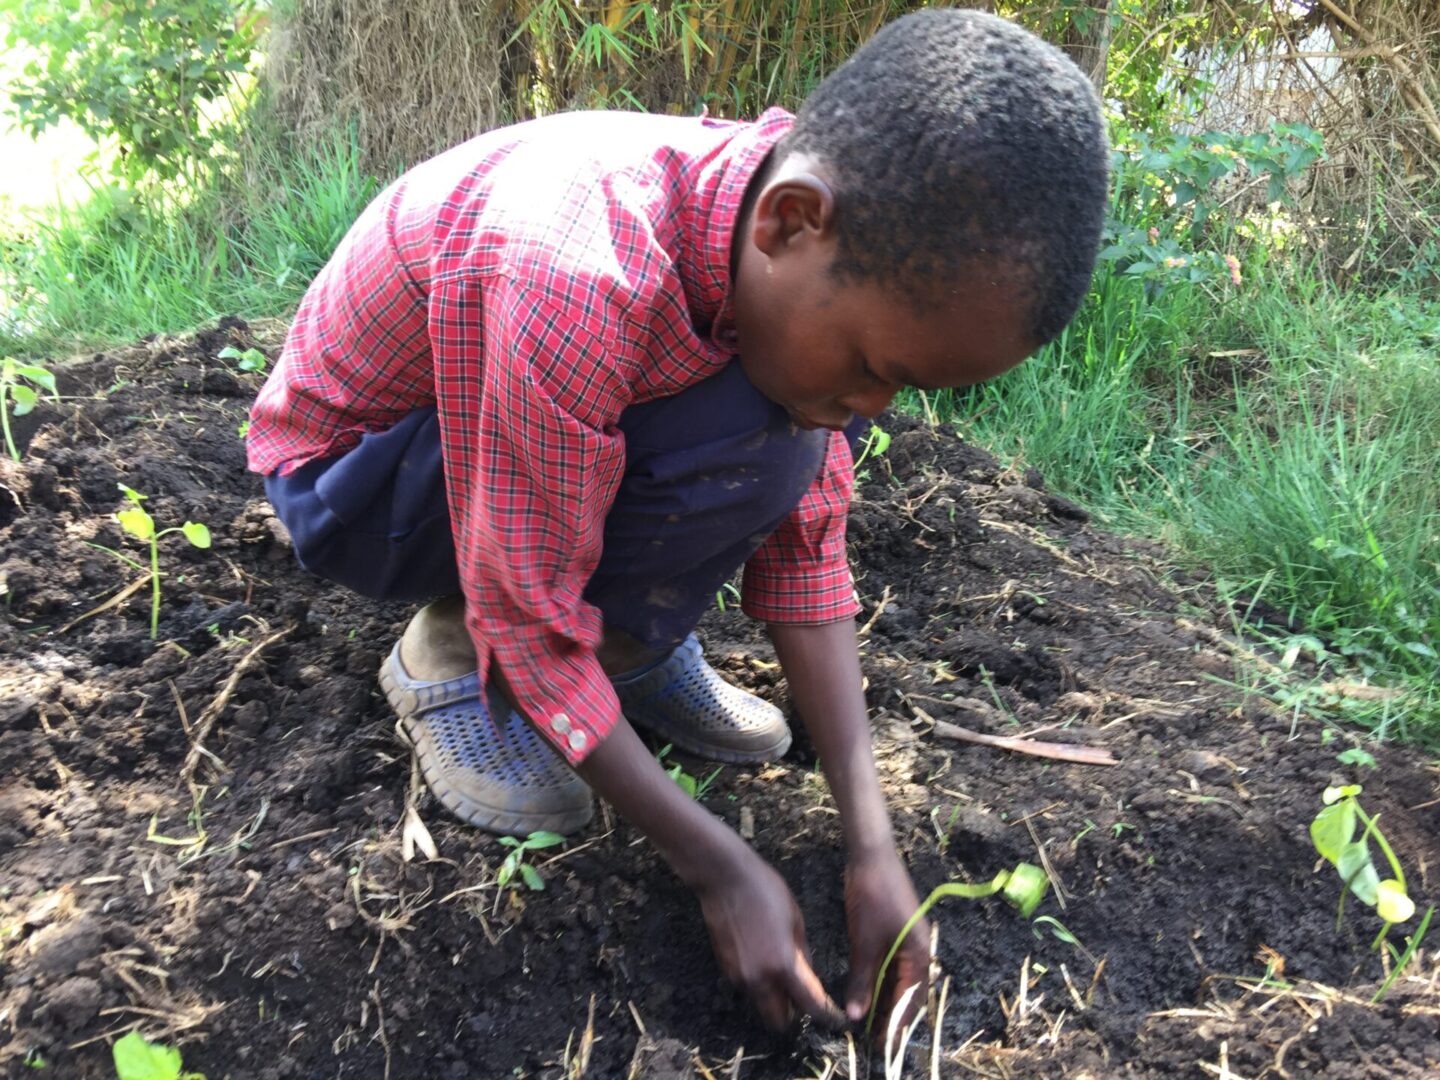 A young boy is digging in the dirt.